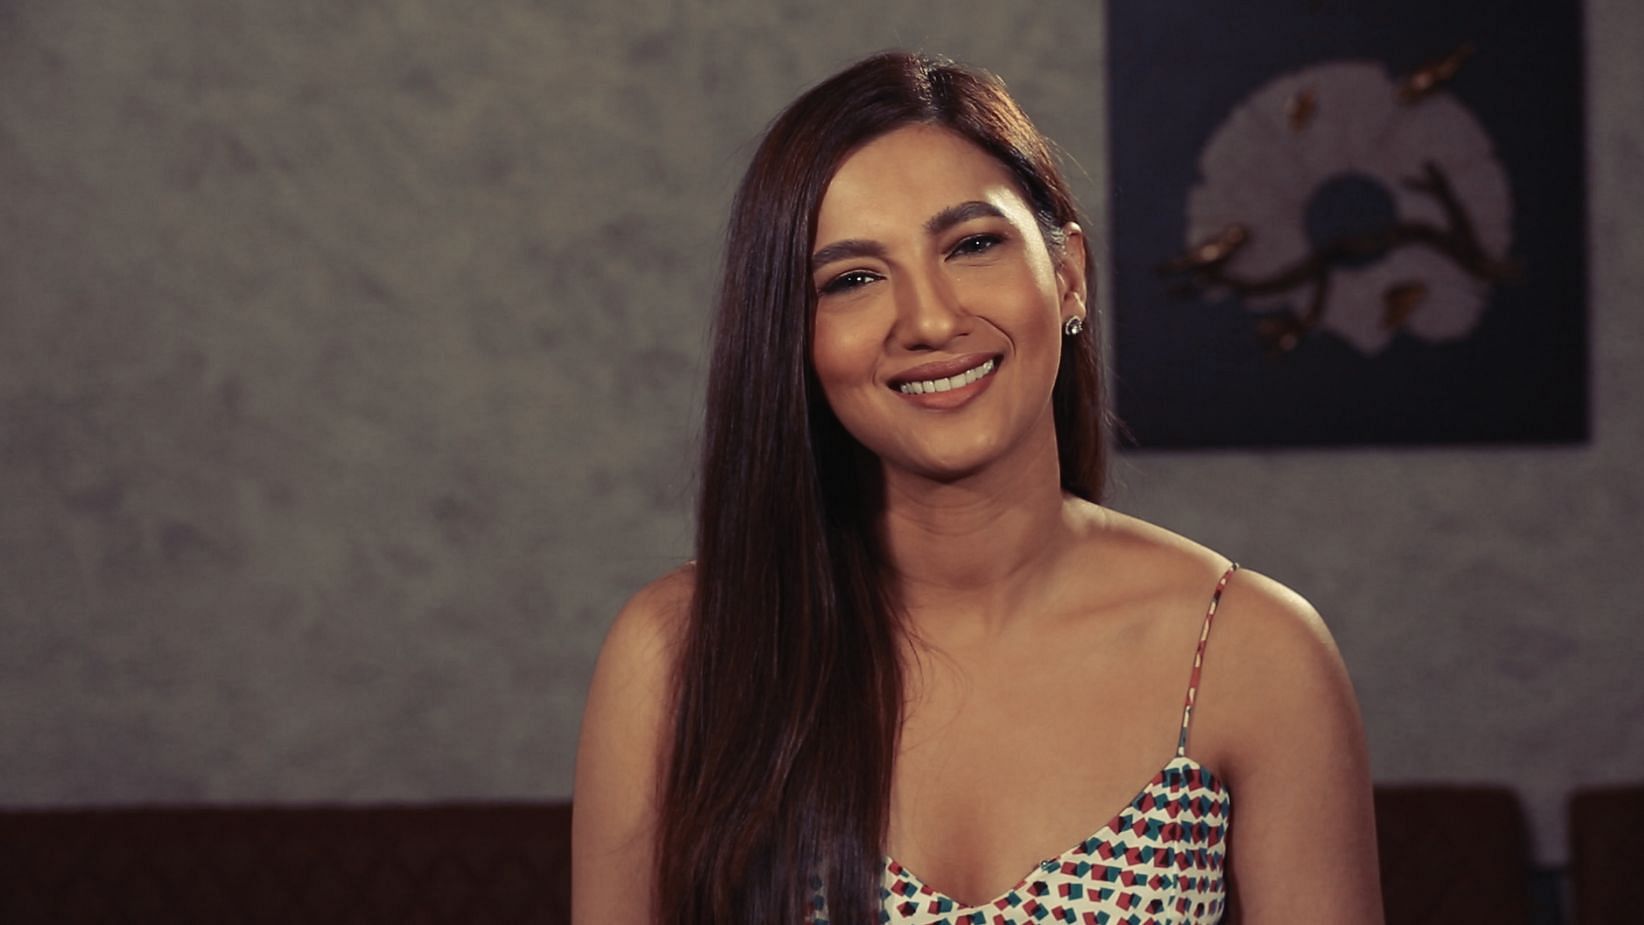 Gauhar Khan will be seen on the remake of the popular show ‘The Office’ on Hotstar.